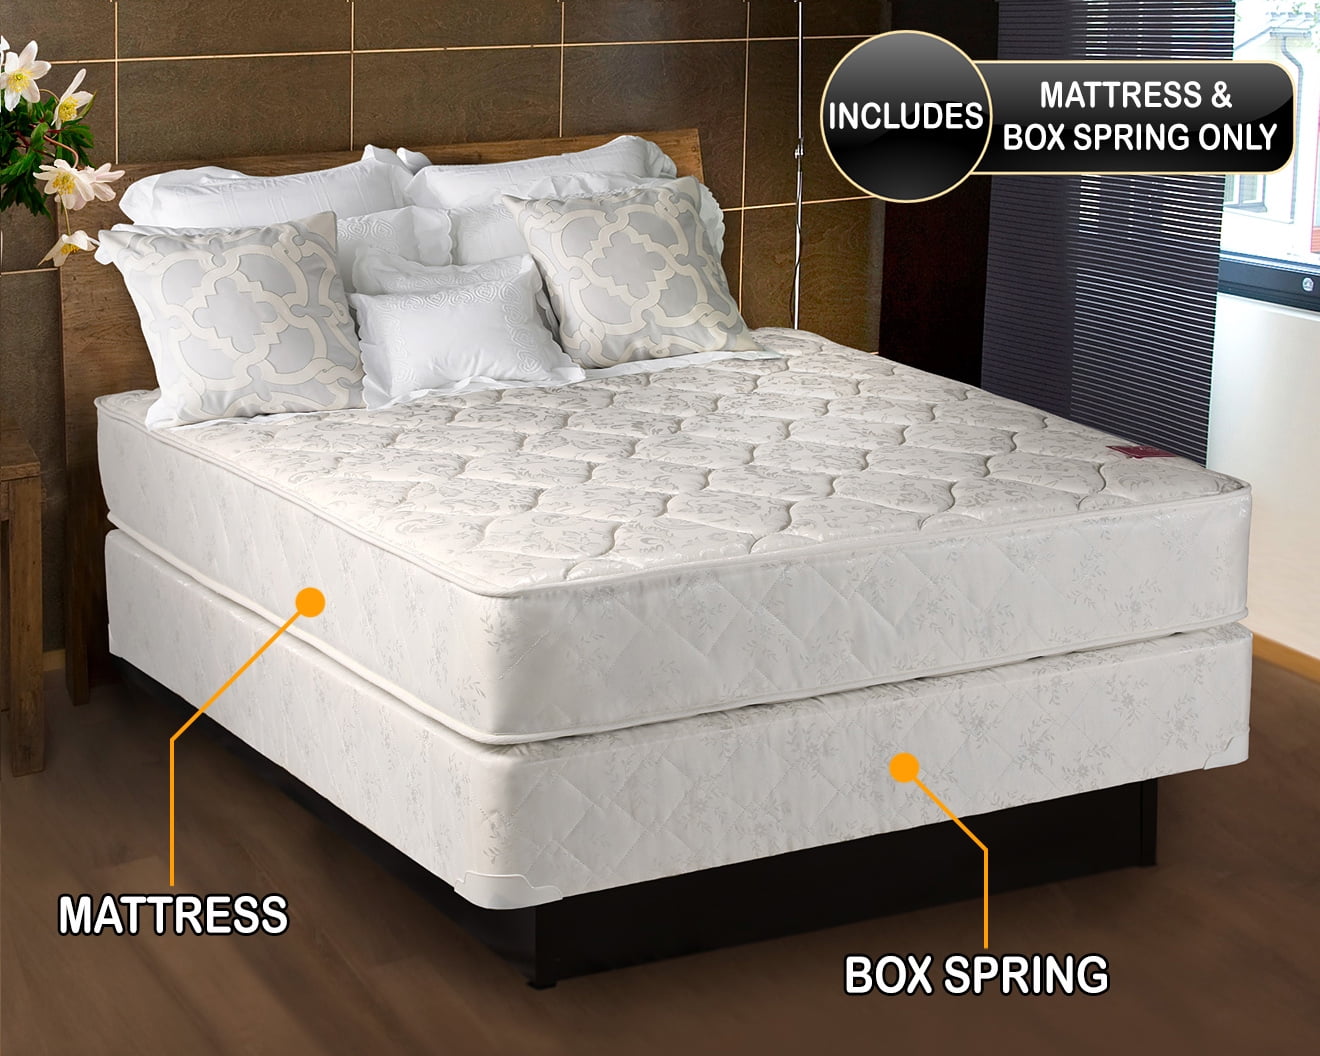 queen mattress and box spring for 399.00